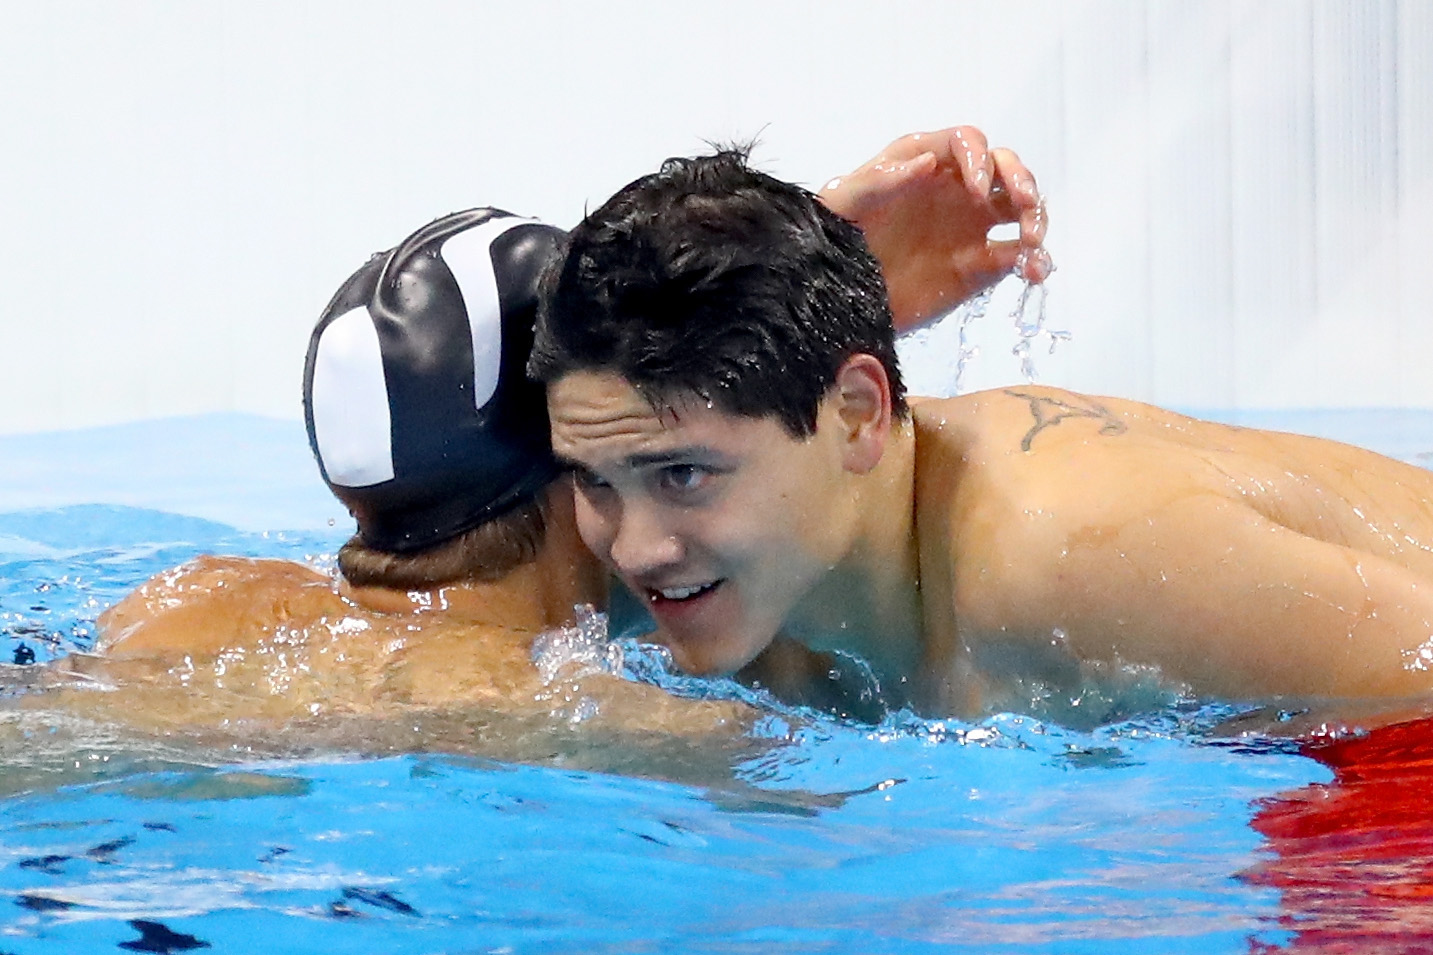 PHOTO: Joseph Schooling of Singapore celebrates winning gold with Michael Phelps of the United States in the Men's 100m Butterfly Final on Day 7 of the Rio 2016 Olympic Games at the Olympic Aquatics Stadium, Aug. 12, 2016, in Rio de Janeiro.